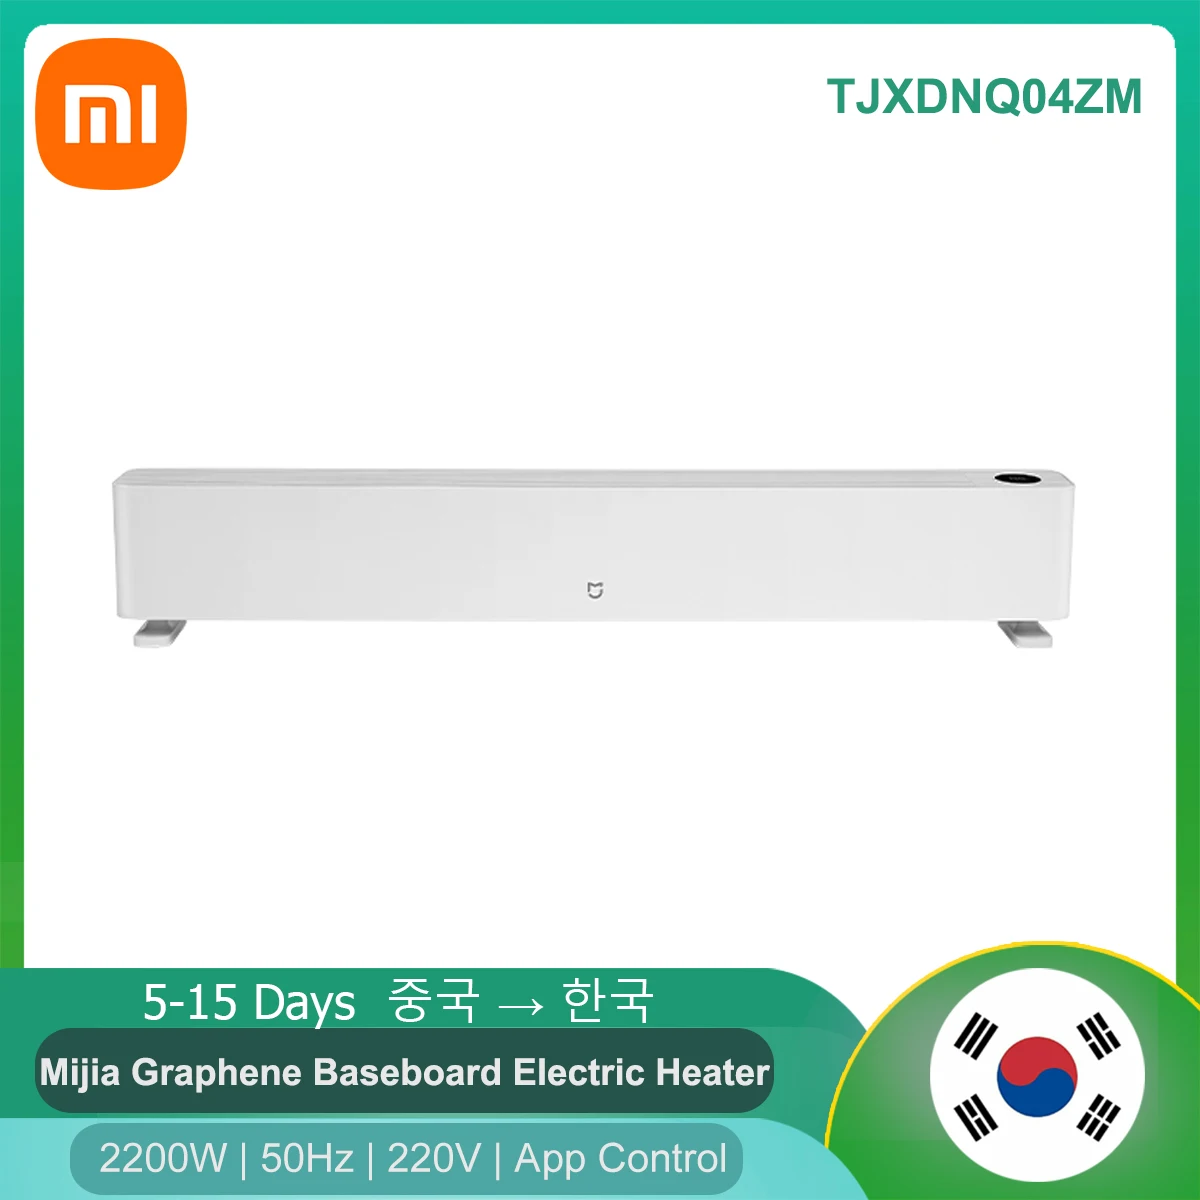 

Xiaomi Mijia Graphene Baseboard Electric Heater TJXDNQ04LX Whole House Thermal Cycle Air Heater Work With MiHome App 220V 2200W